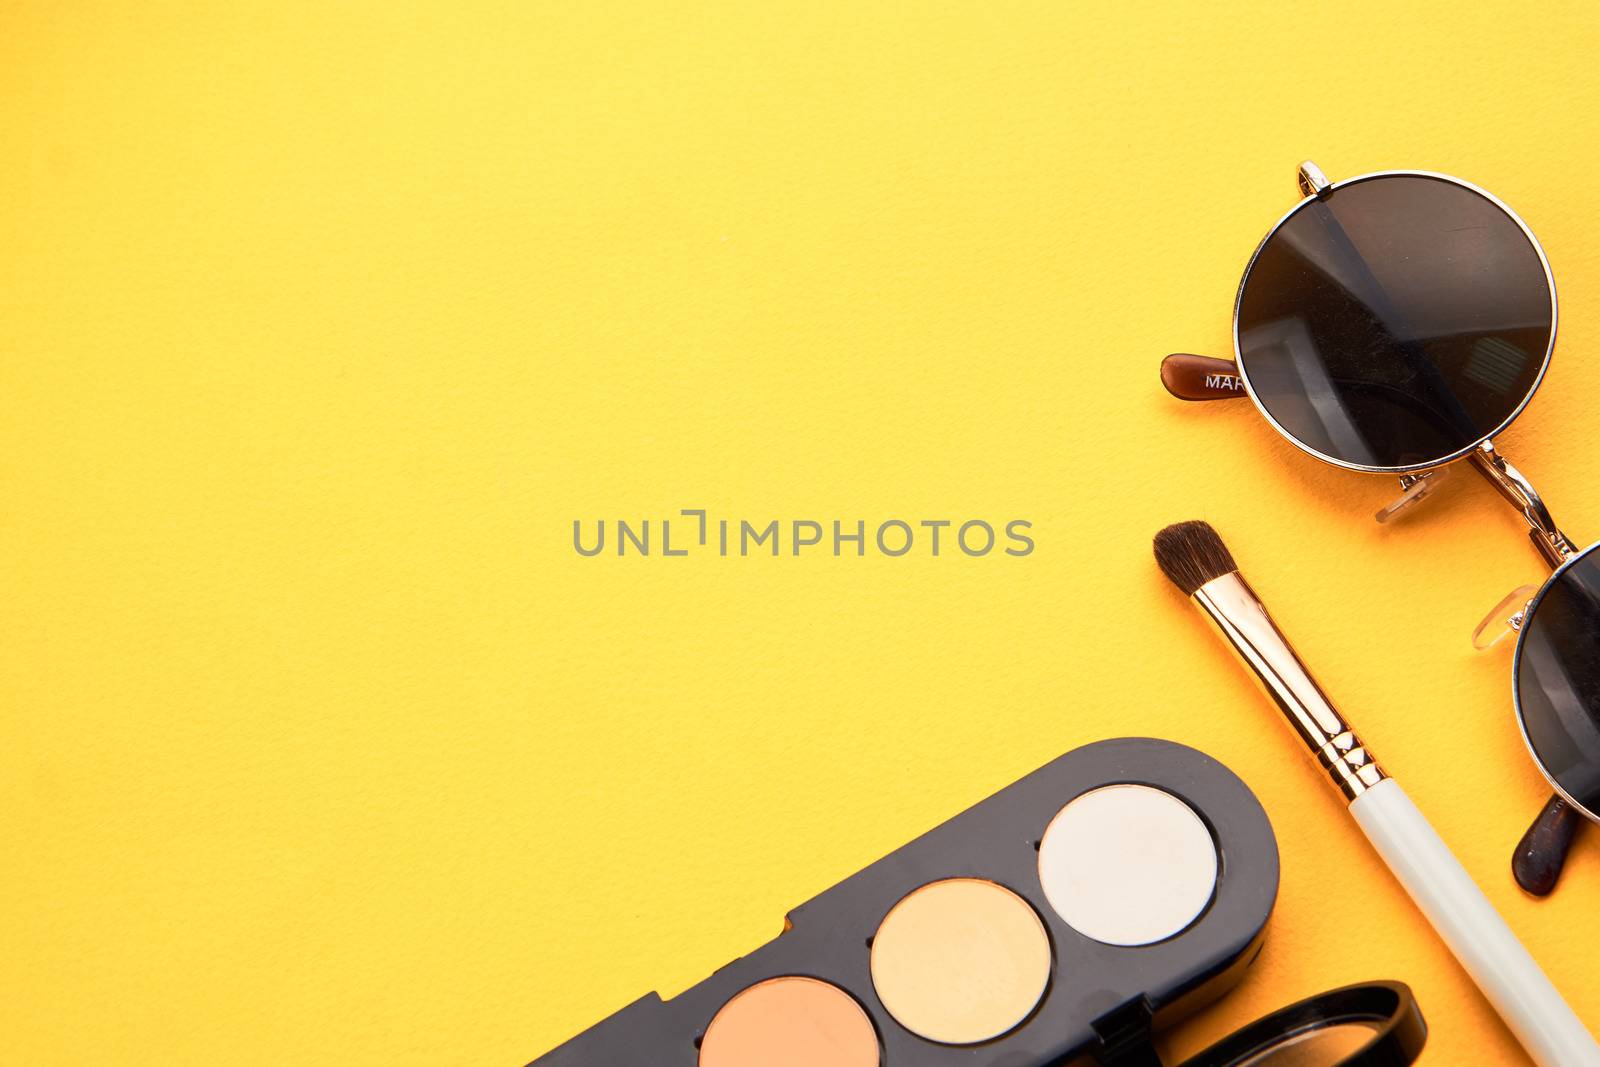 Professional eyeshadows and makeup brushes on a yellow background make-up decoration by SHOTPRIME